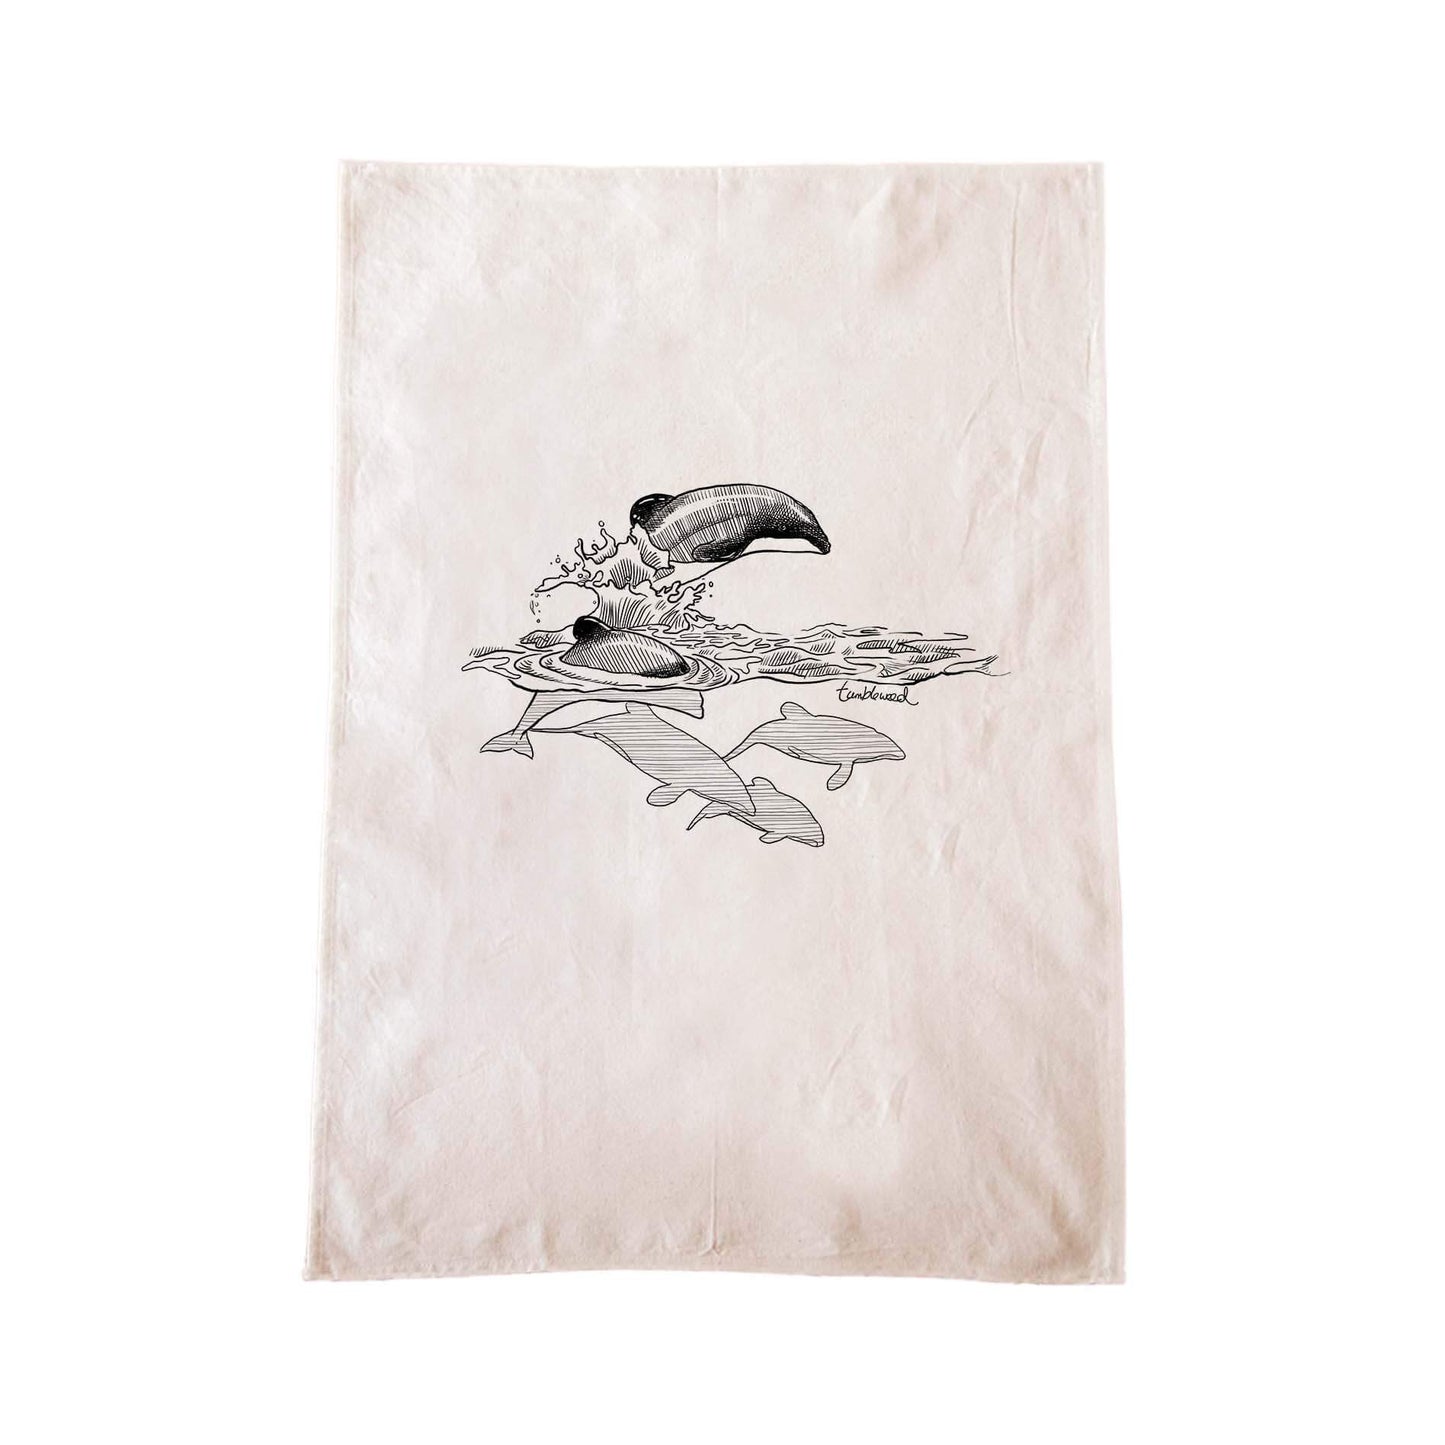 Off-white cotton tea towel with a screen printed Māui dolphin design.